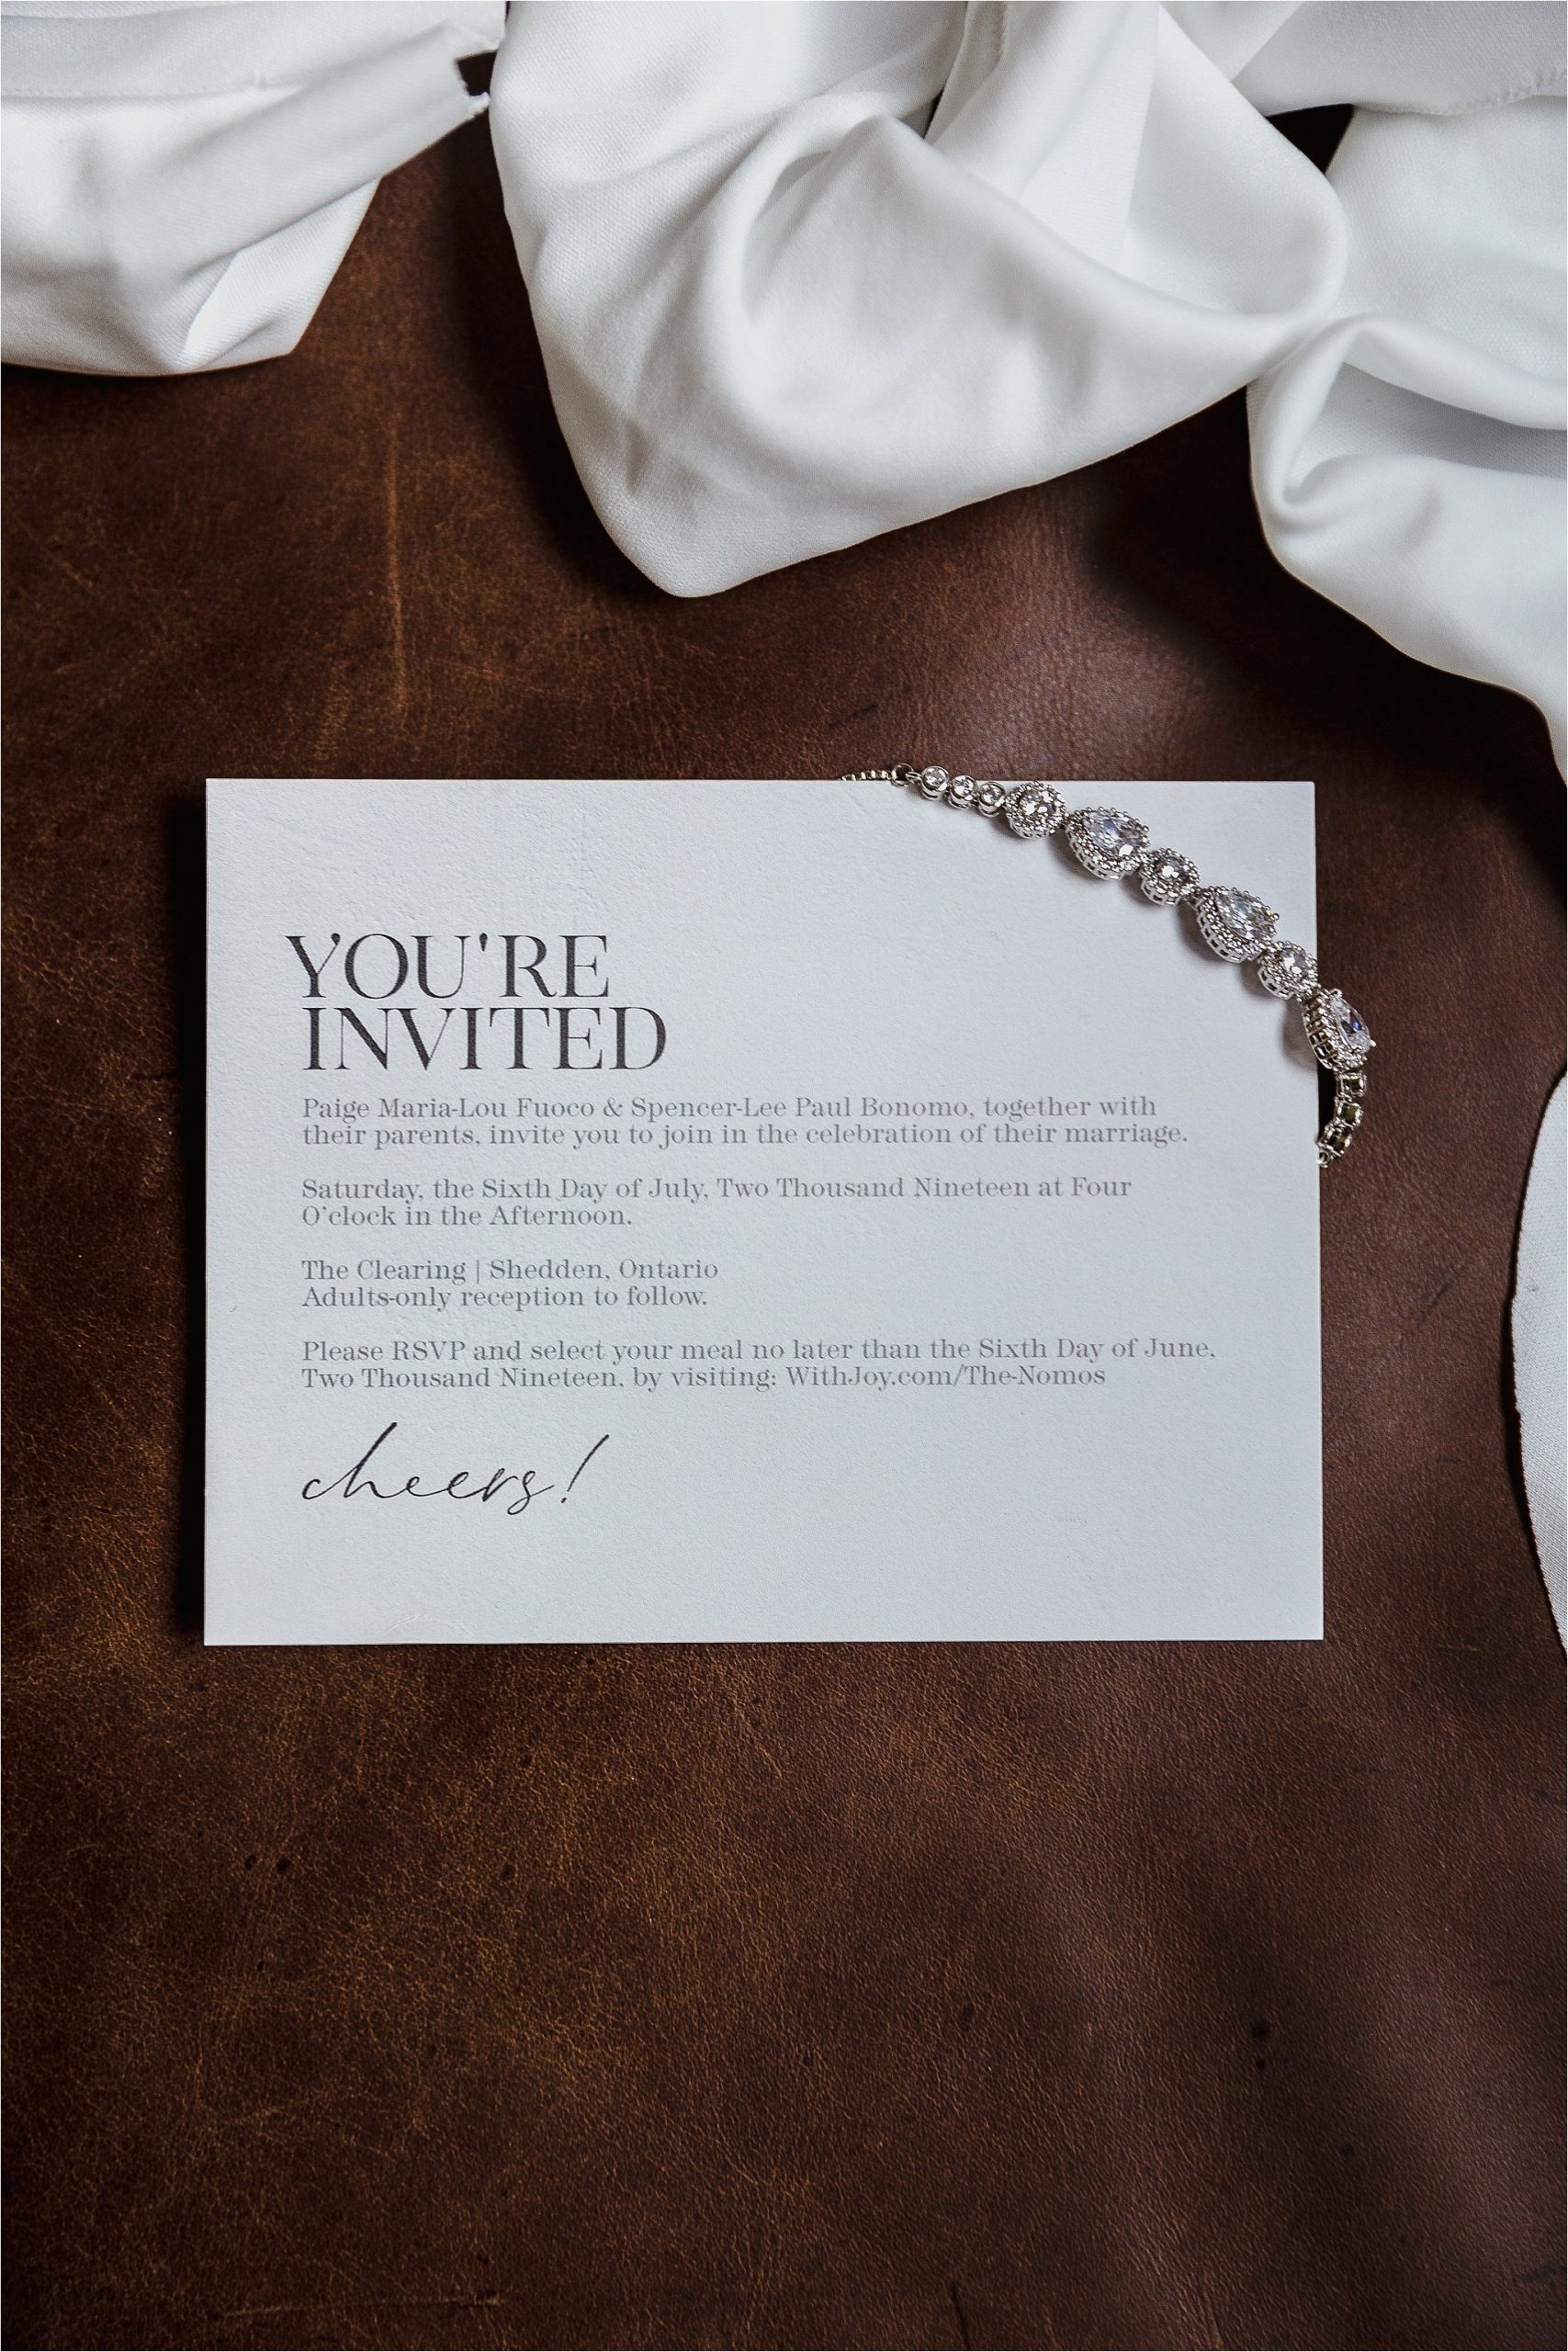 Wedding invitation and bride's bracelet on leather couch